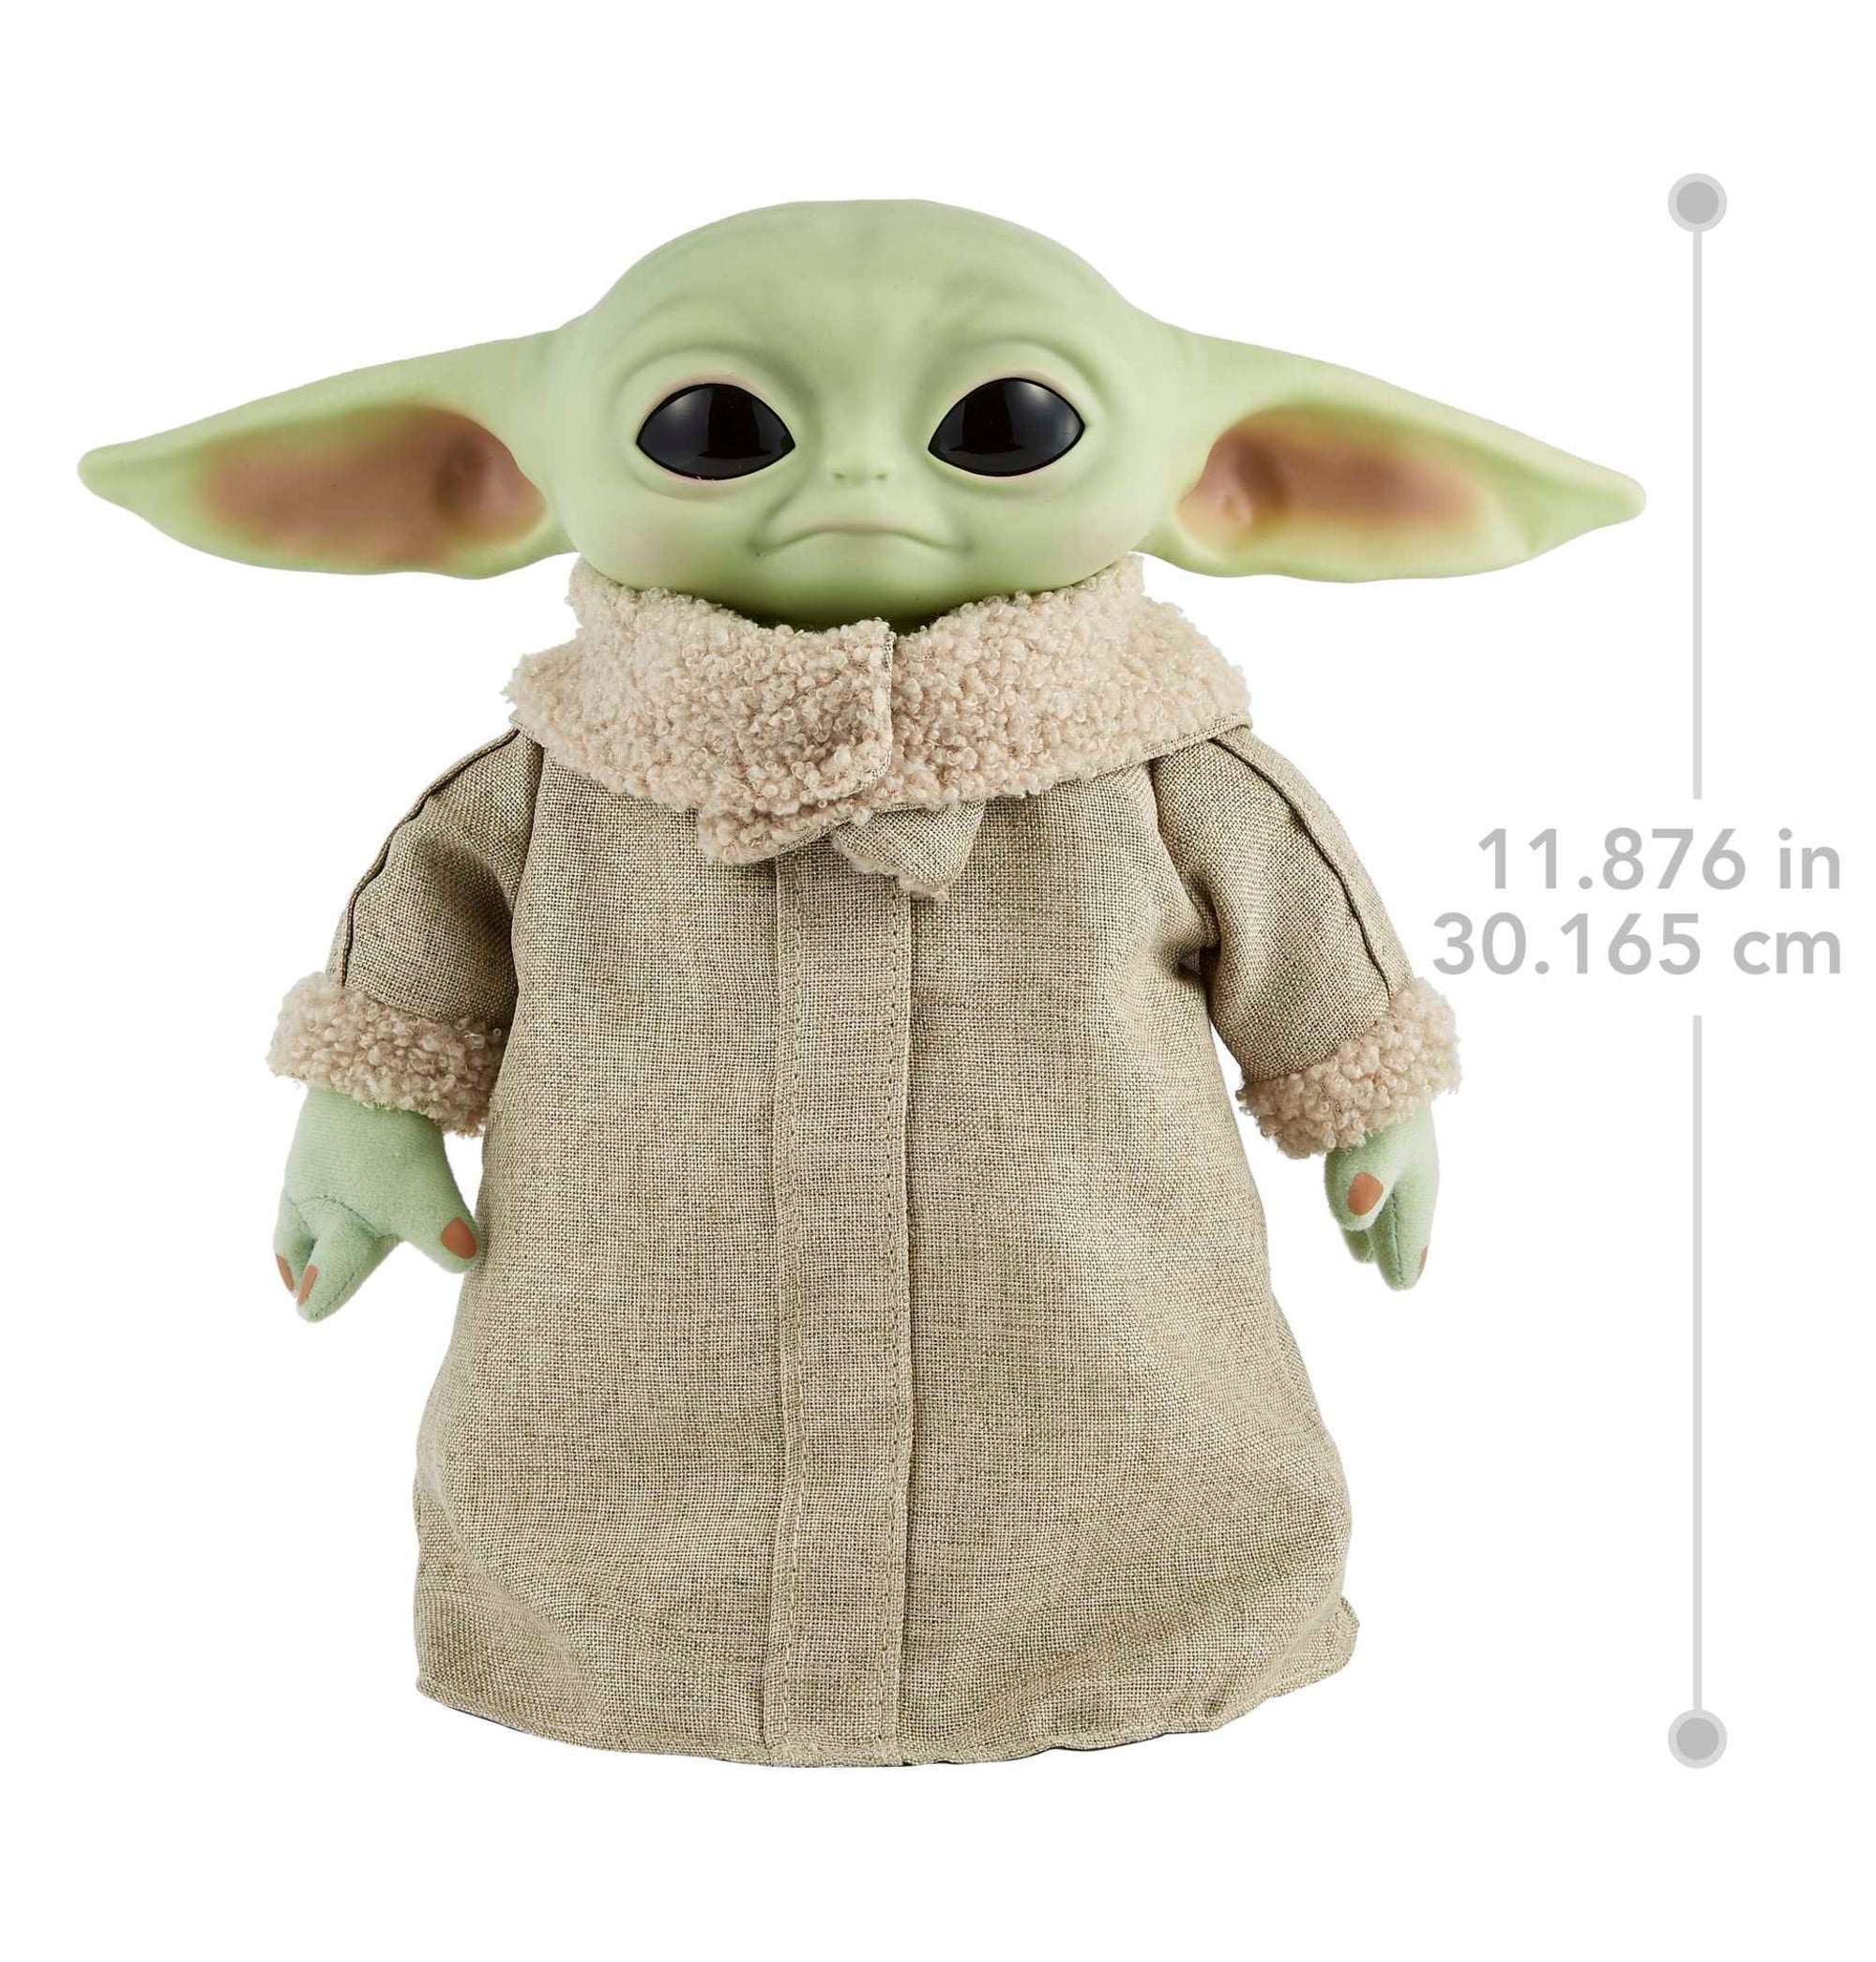 Mattel Star Wars Plush Toys, Grogu Soft Doll from The Mandalorian, 11-inch  Figure, Collectible Stuffed Animals for Kids